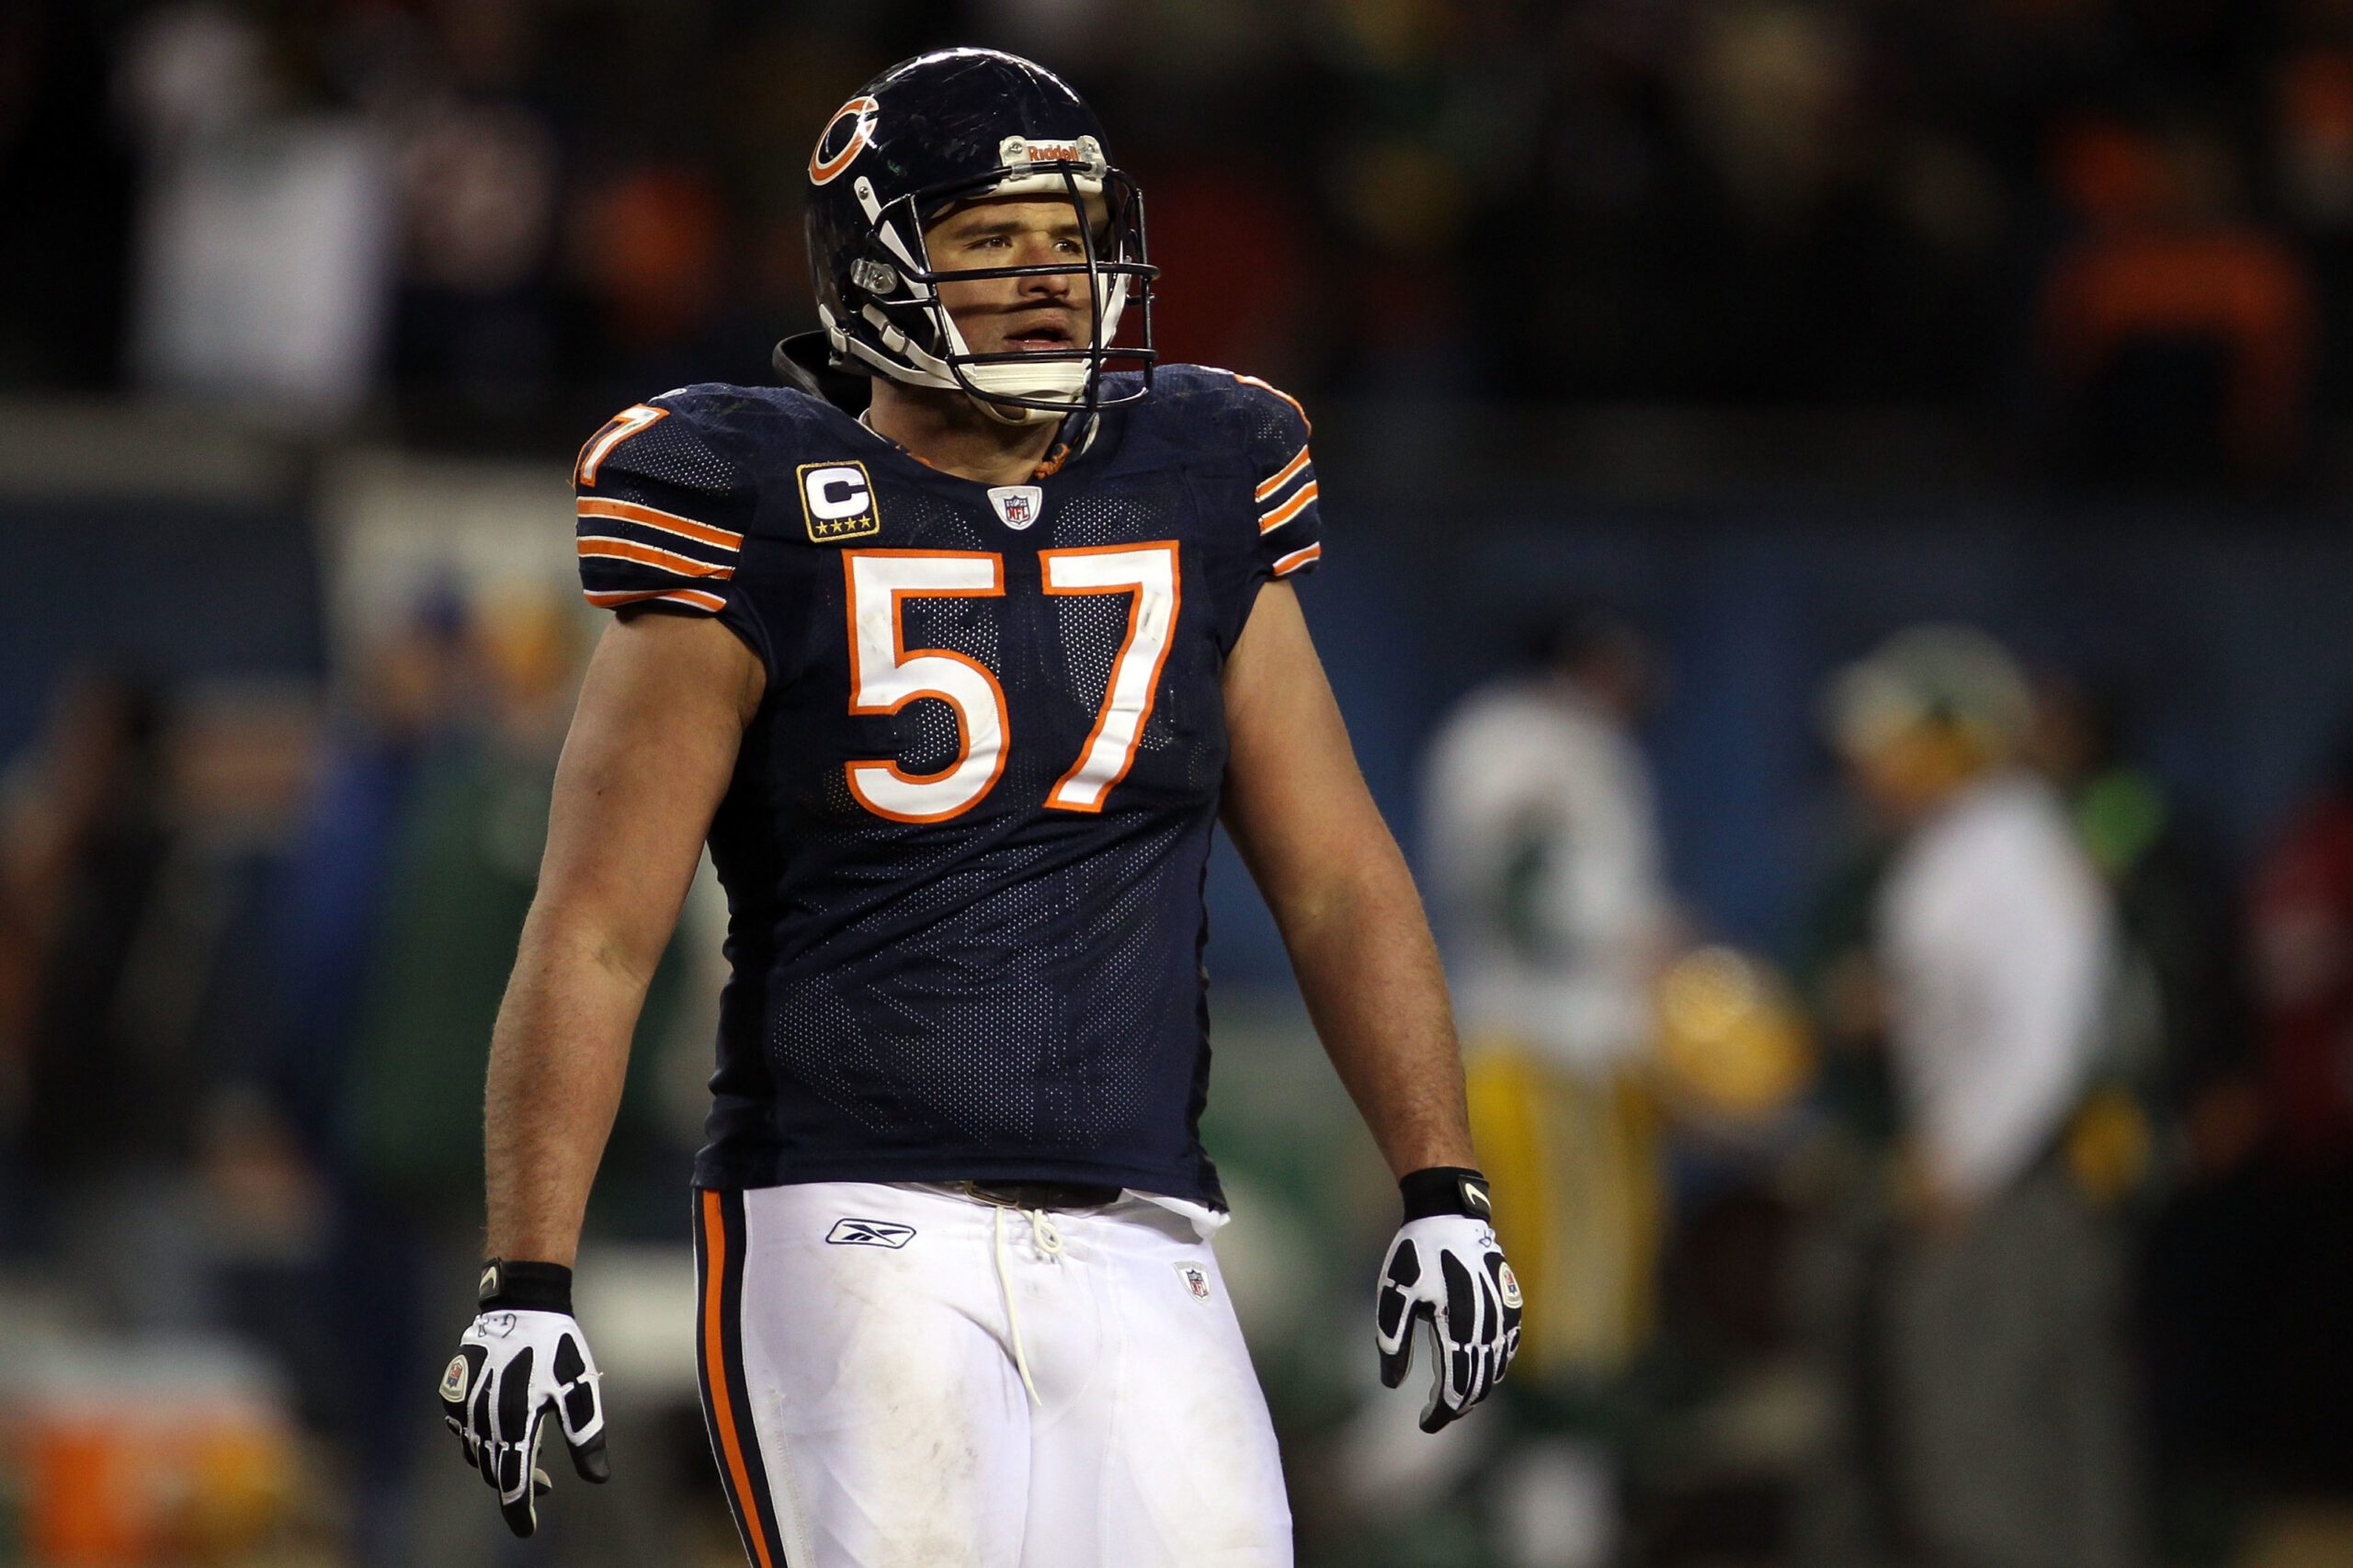 Former Chicago Bears offensive lineman Olin Kreutz is pissed off after Aaron Rodgers began screaming "I still own you".